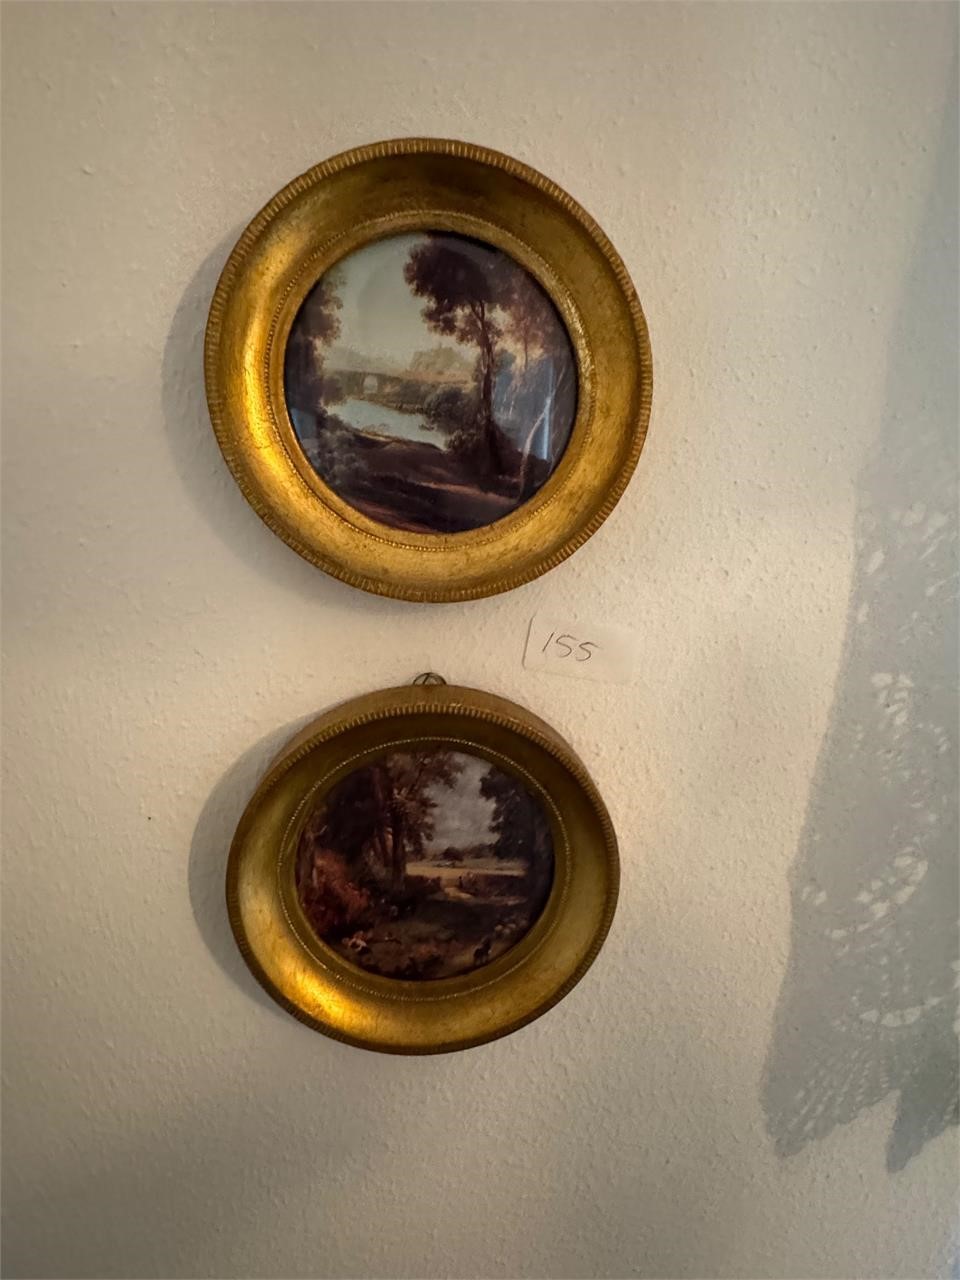 2 CIRCLE FRAMED PICTURES